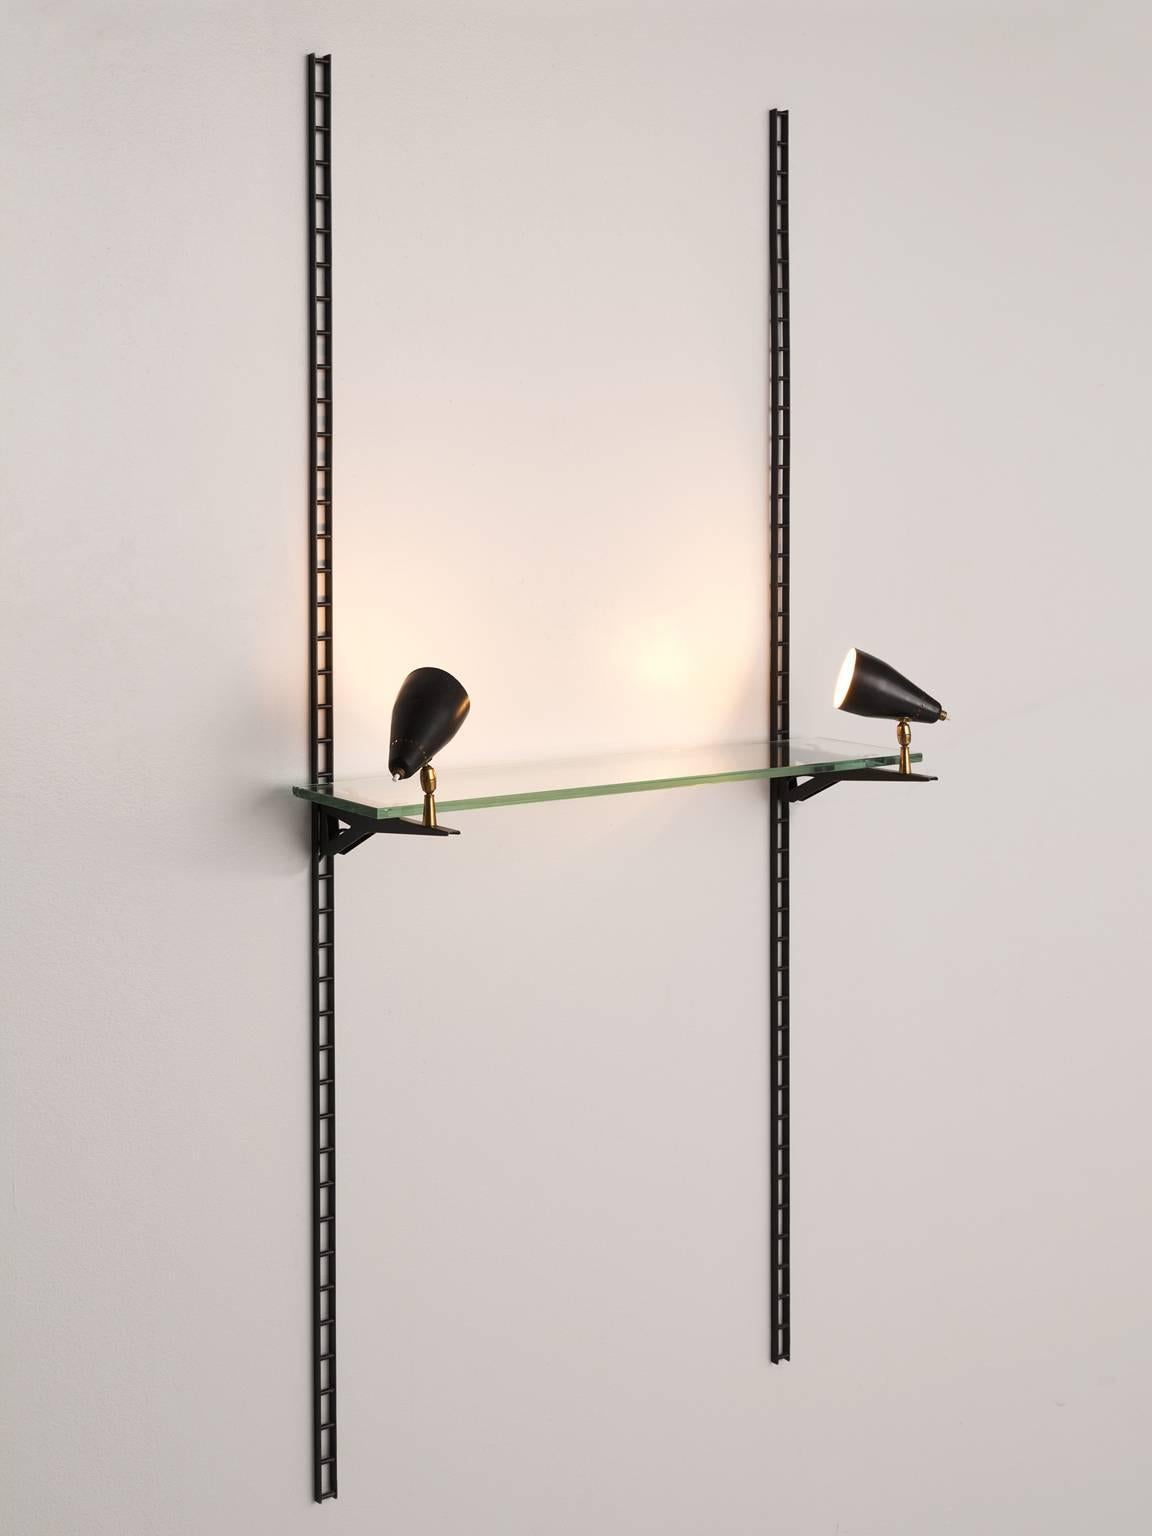 Illuminated display console, in metal, glass and brass, by Gino Sarfatti for Arteluce, Italy, 1970s. 

This very rare Arteluce wall lamps works as a display, due to the adjustable glass shelve that is placed on top of the lighting system. The lights